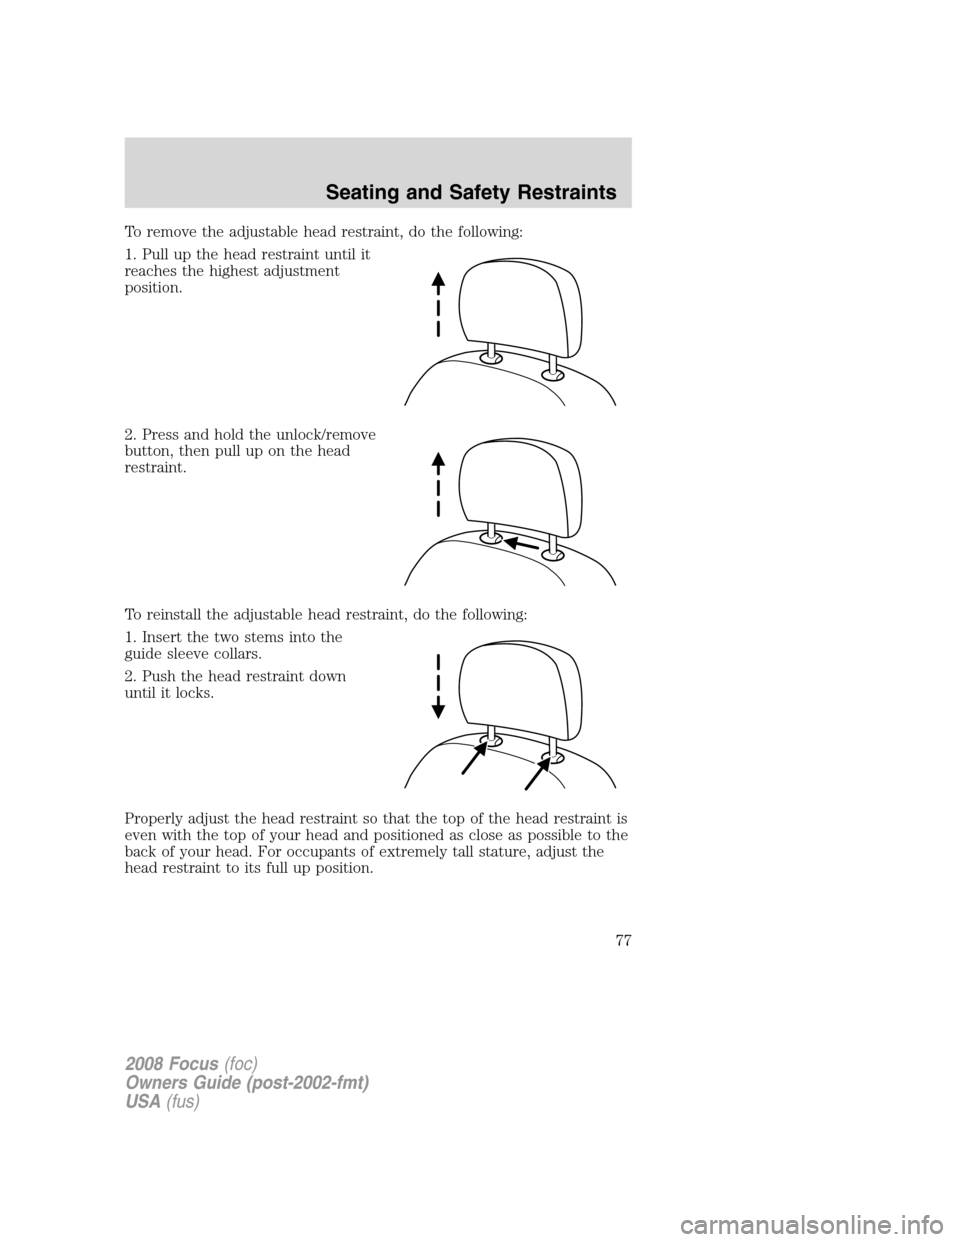 FORD FOCUS 2008 2.G Manual PDF To remove the adjustable head restraint, do the following:
1. Pull up the head restraint until it
reaches the highest adjustment
position.
2. Press and hold the unlock/remove
button, then pull up on t